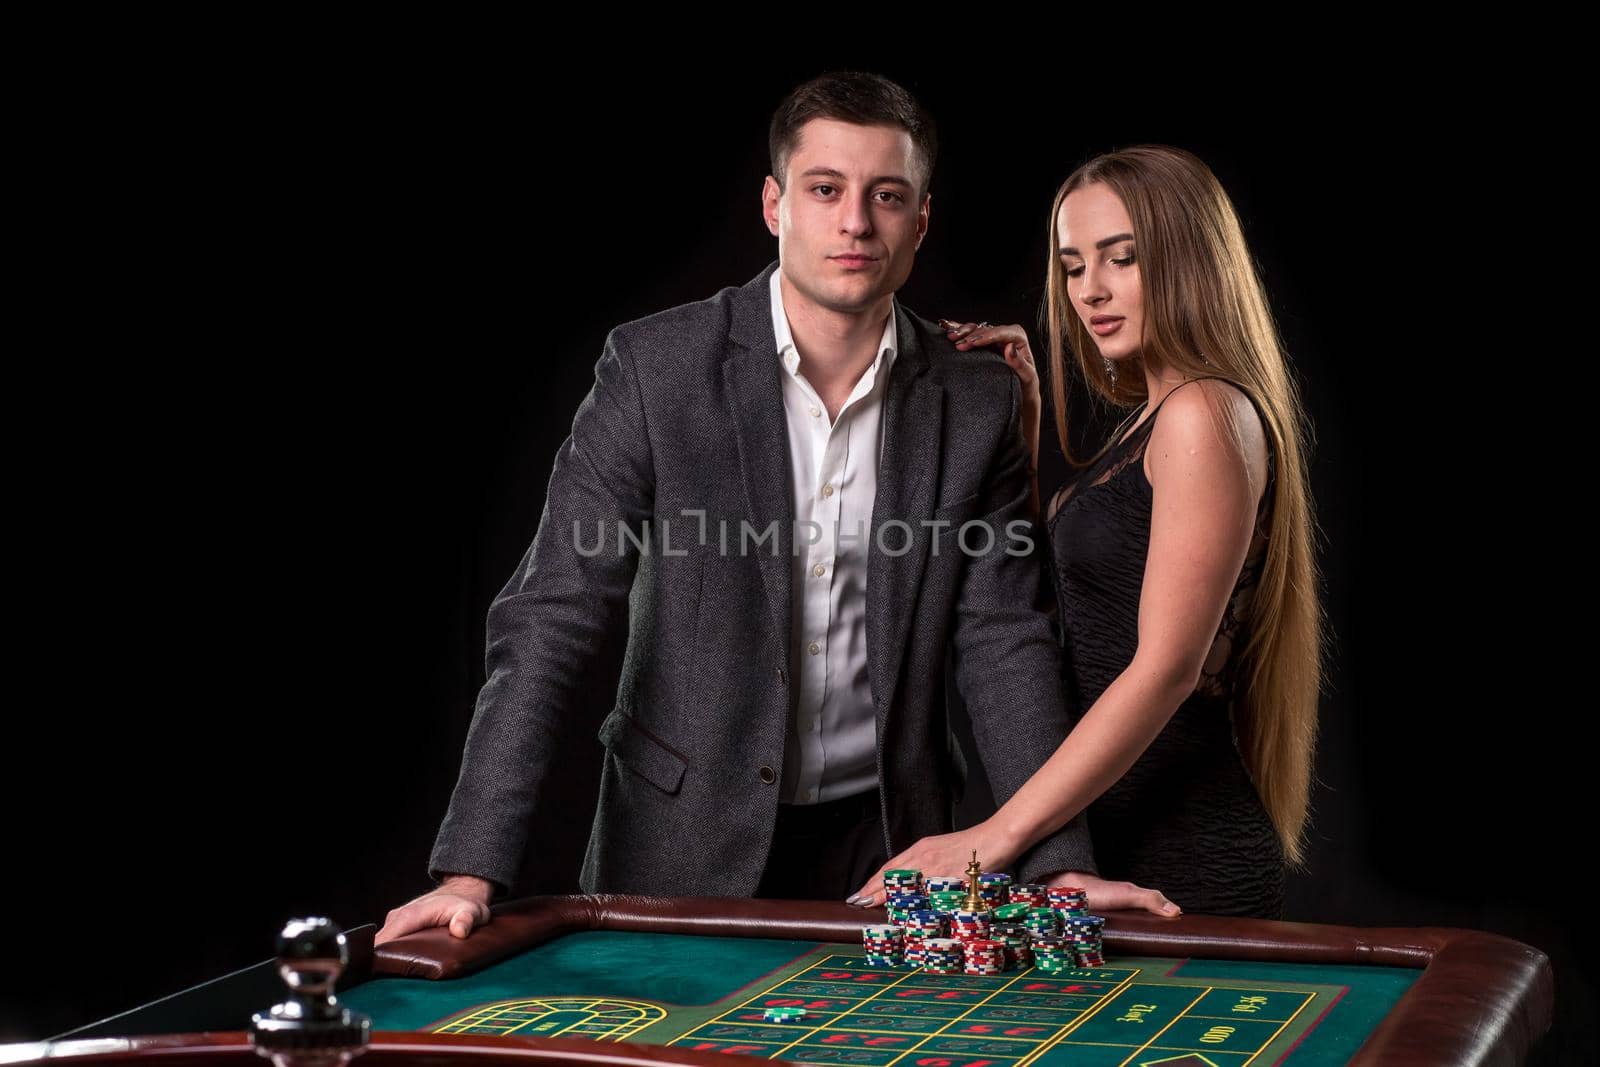 Elegant couple at the casino betting on the roulette, on a black background by nazarovsergey